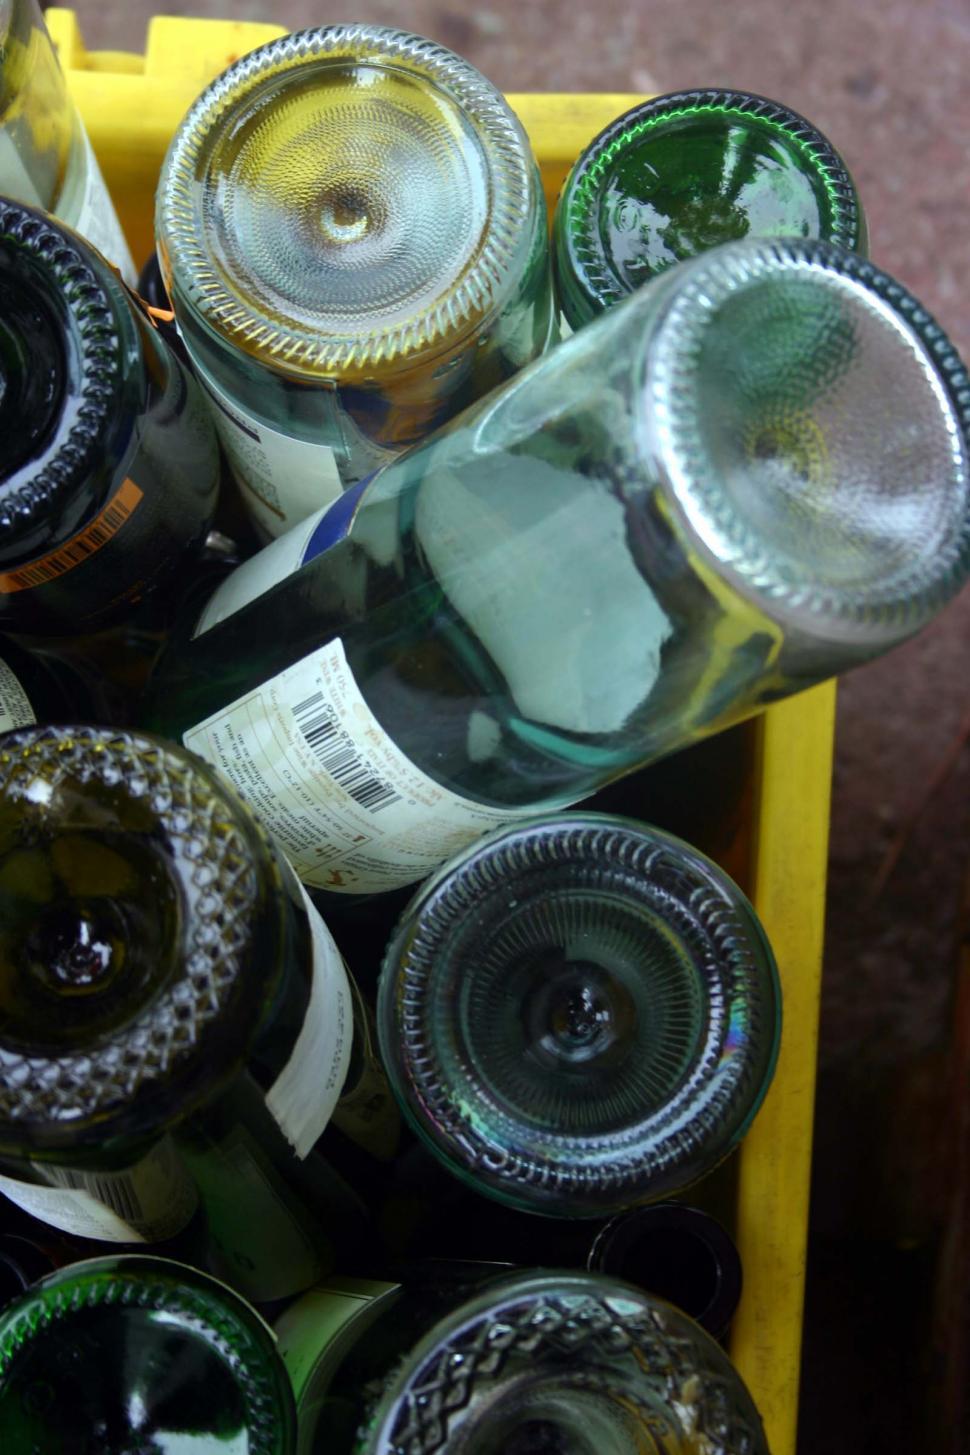 Free Image of Yellow Crate Filled With Empty Wine Bottles 